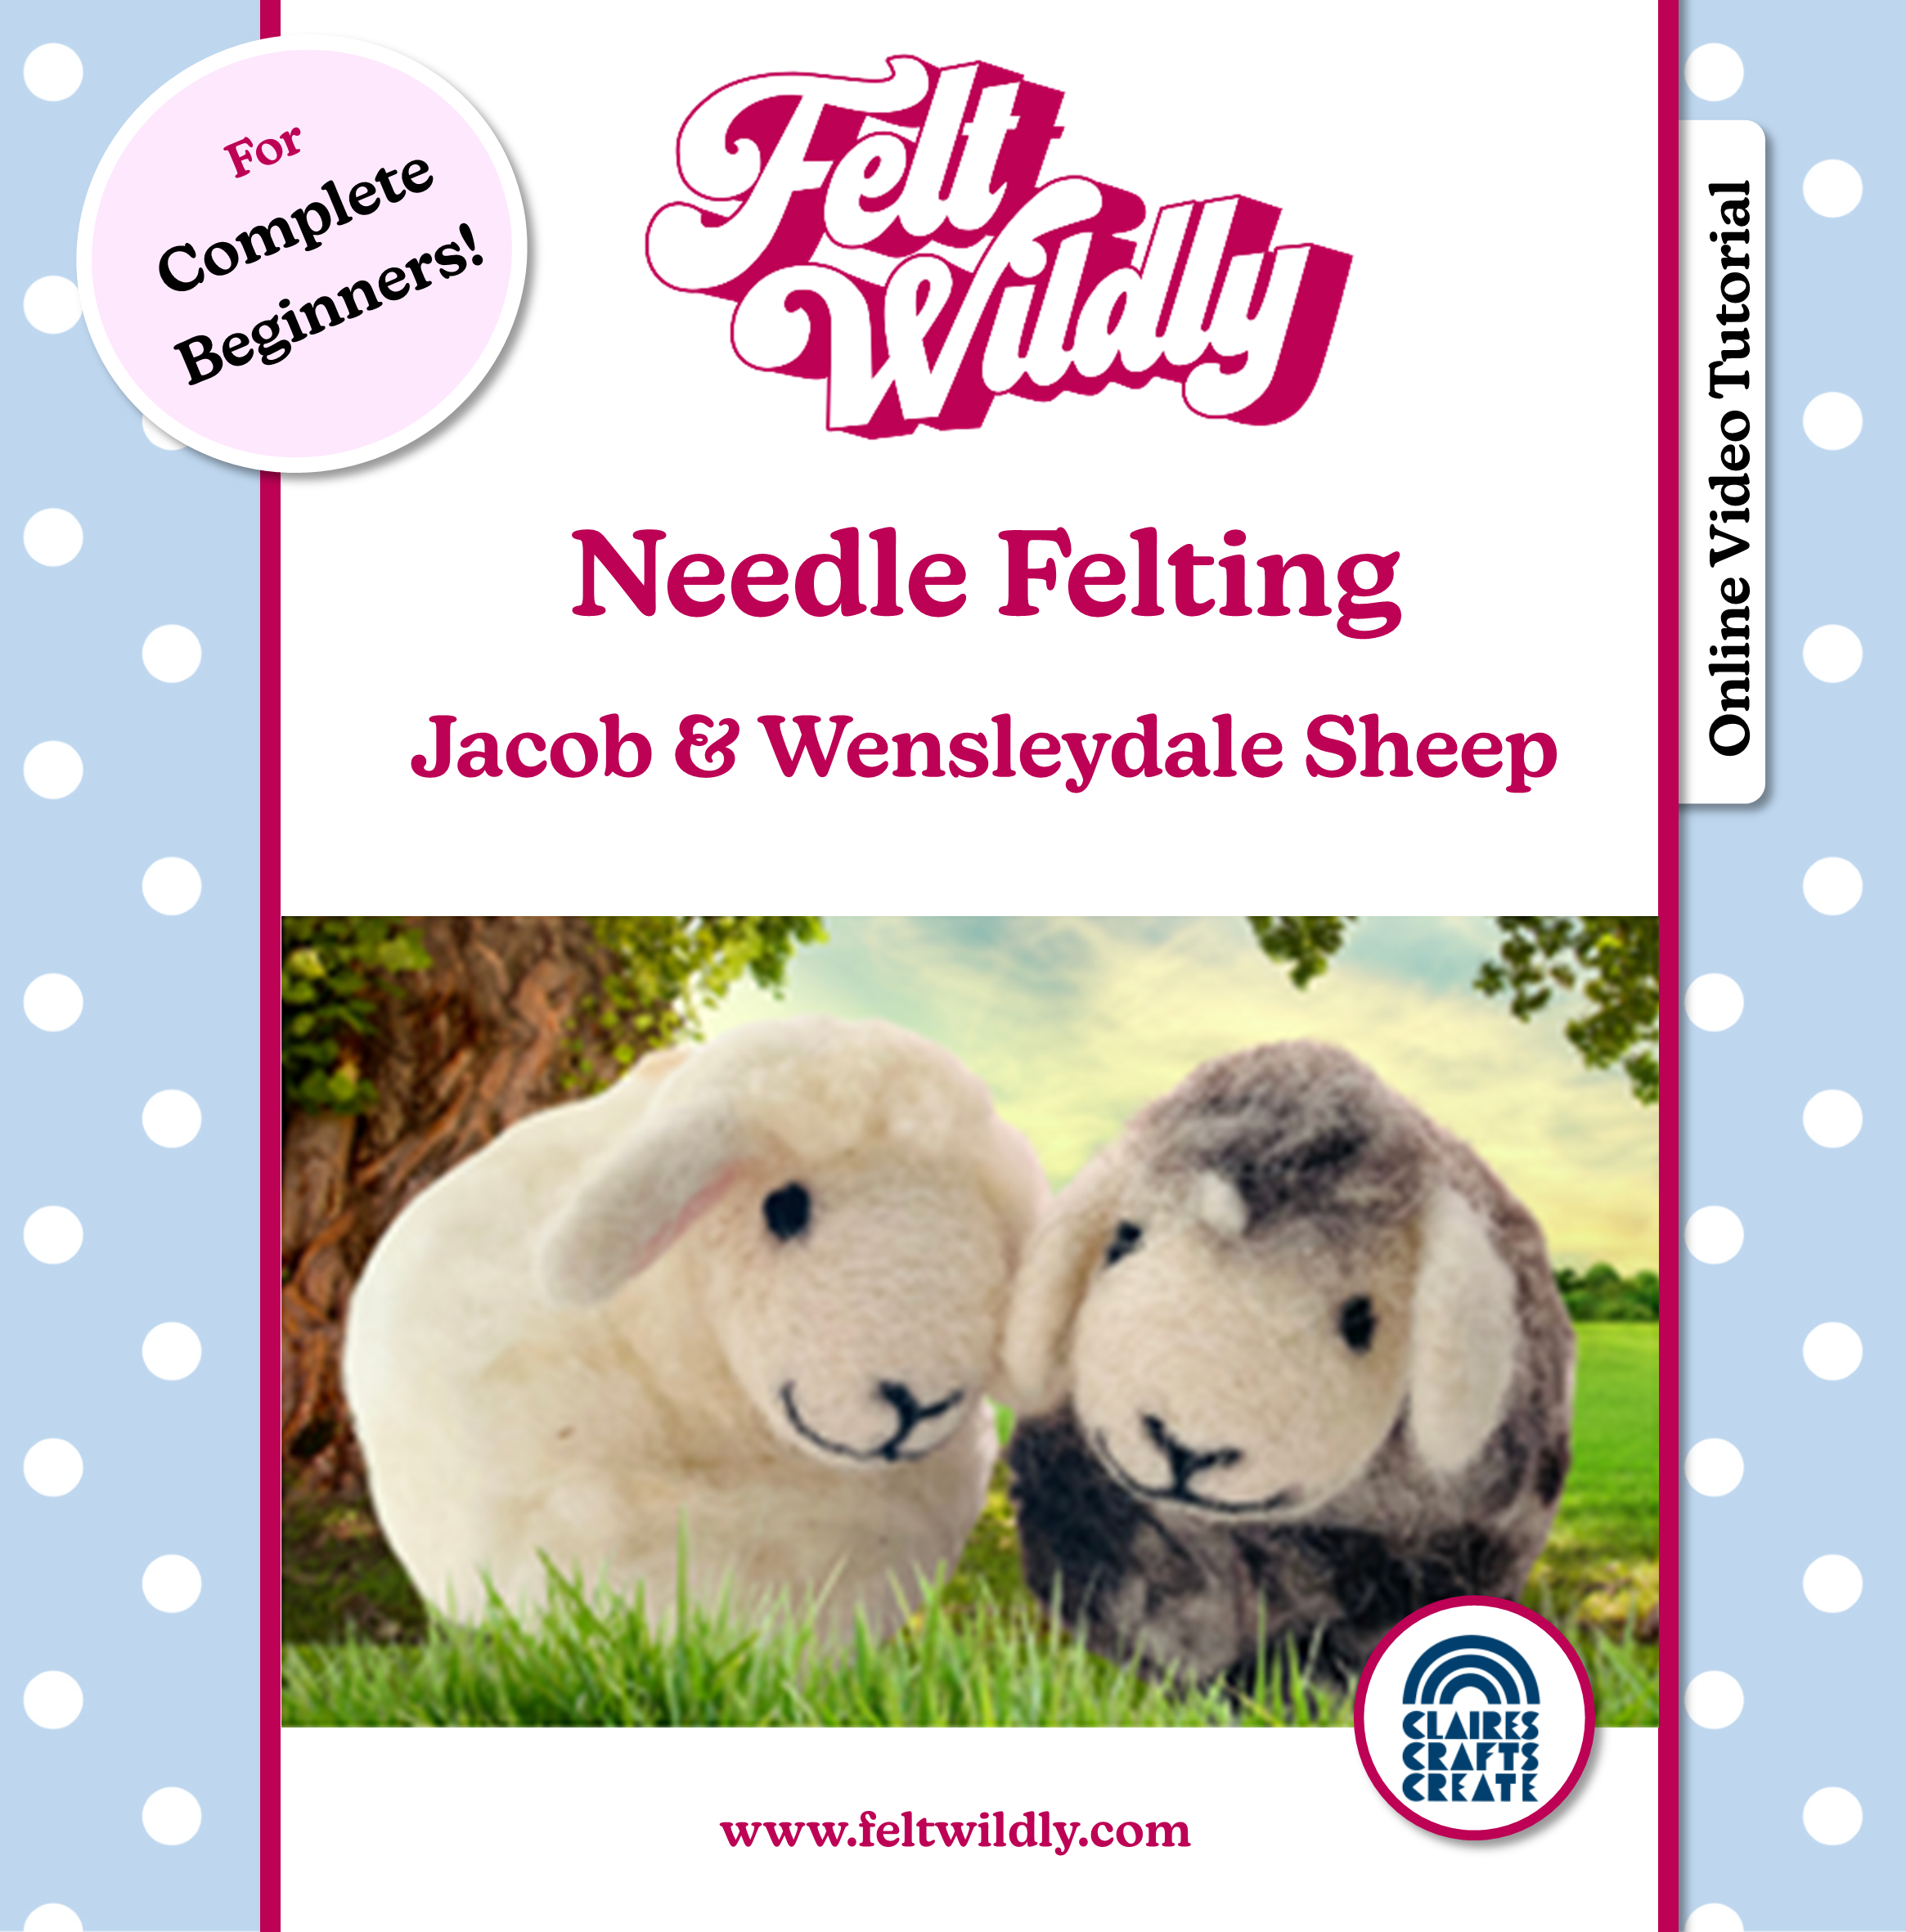 Workshop in a Box - Introduction to Needle Felting - Jacob and Wensleydale Sheep!